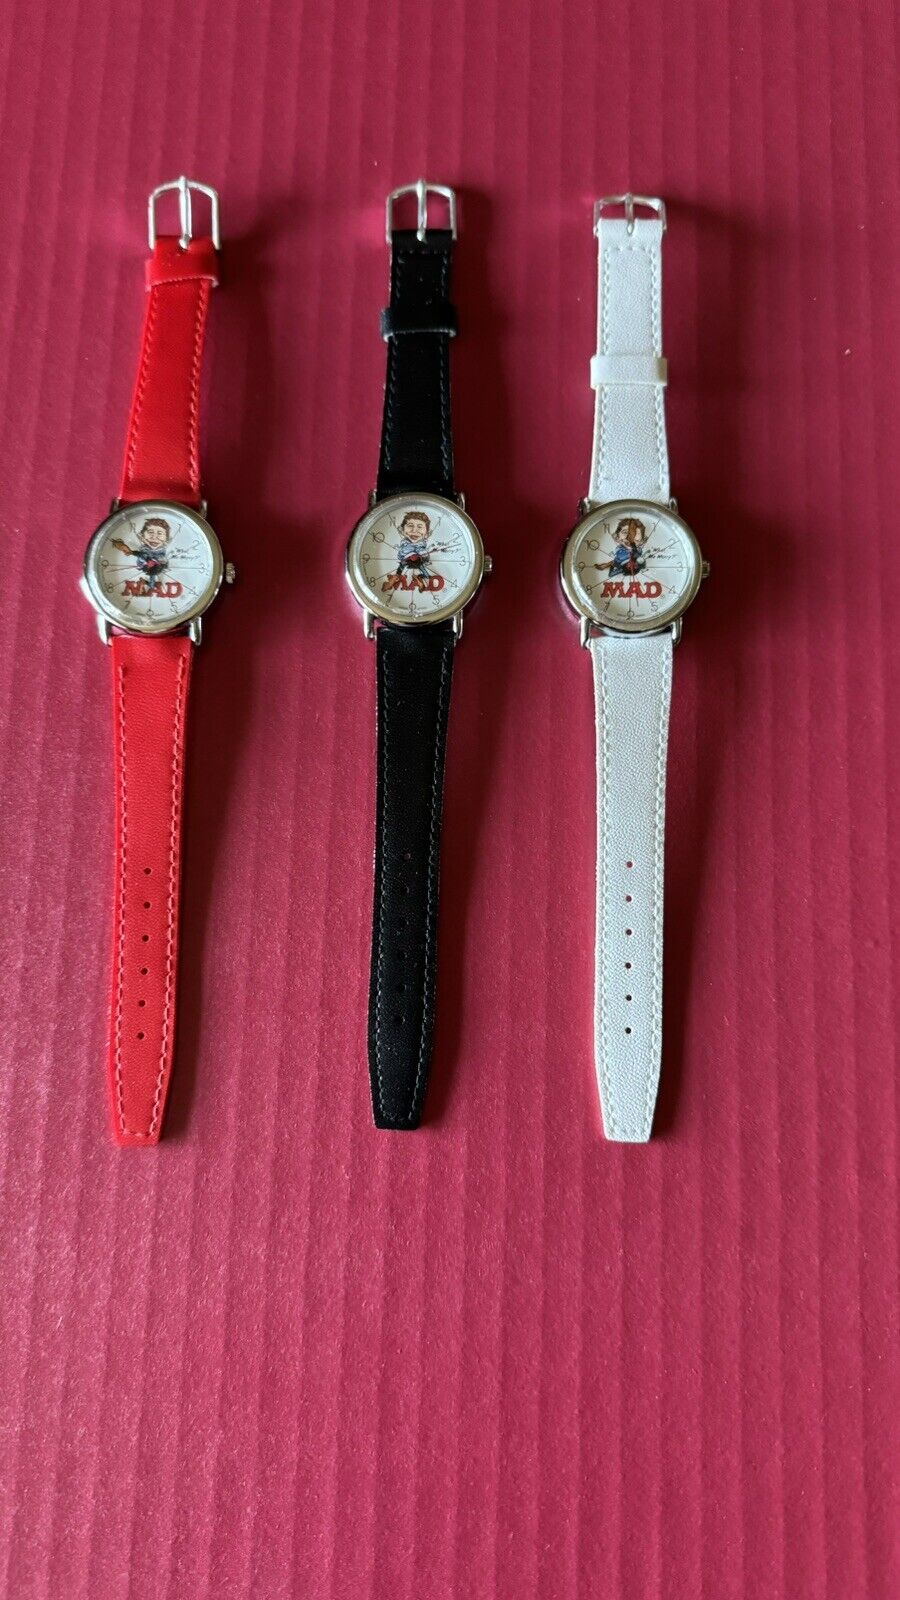 Mad Magazine Watch Display For Stores With 3 New Alfred E Neuman Watches Rare